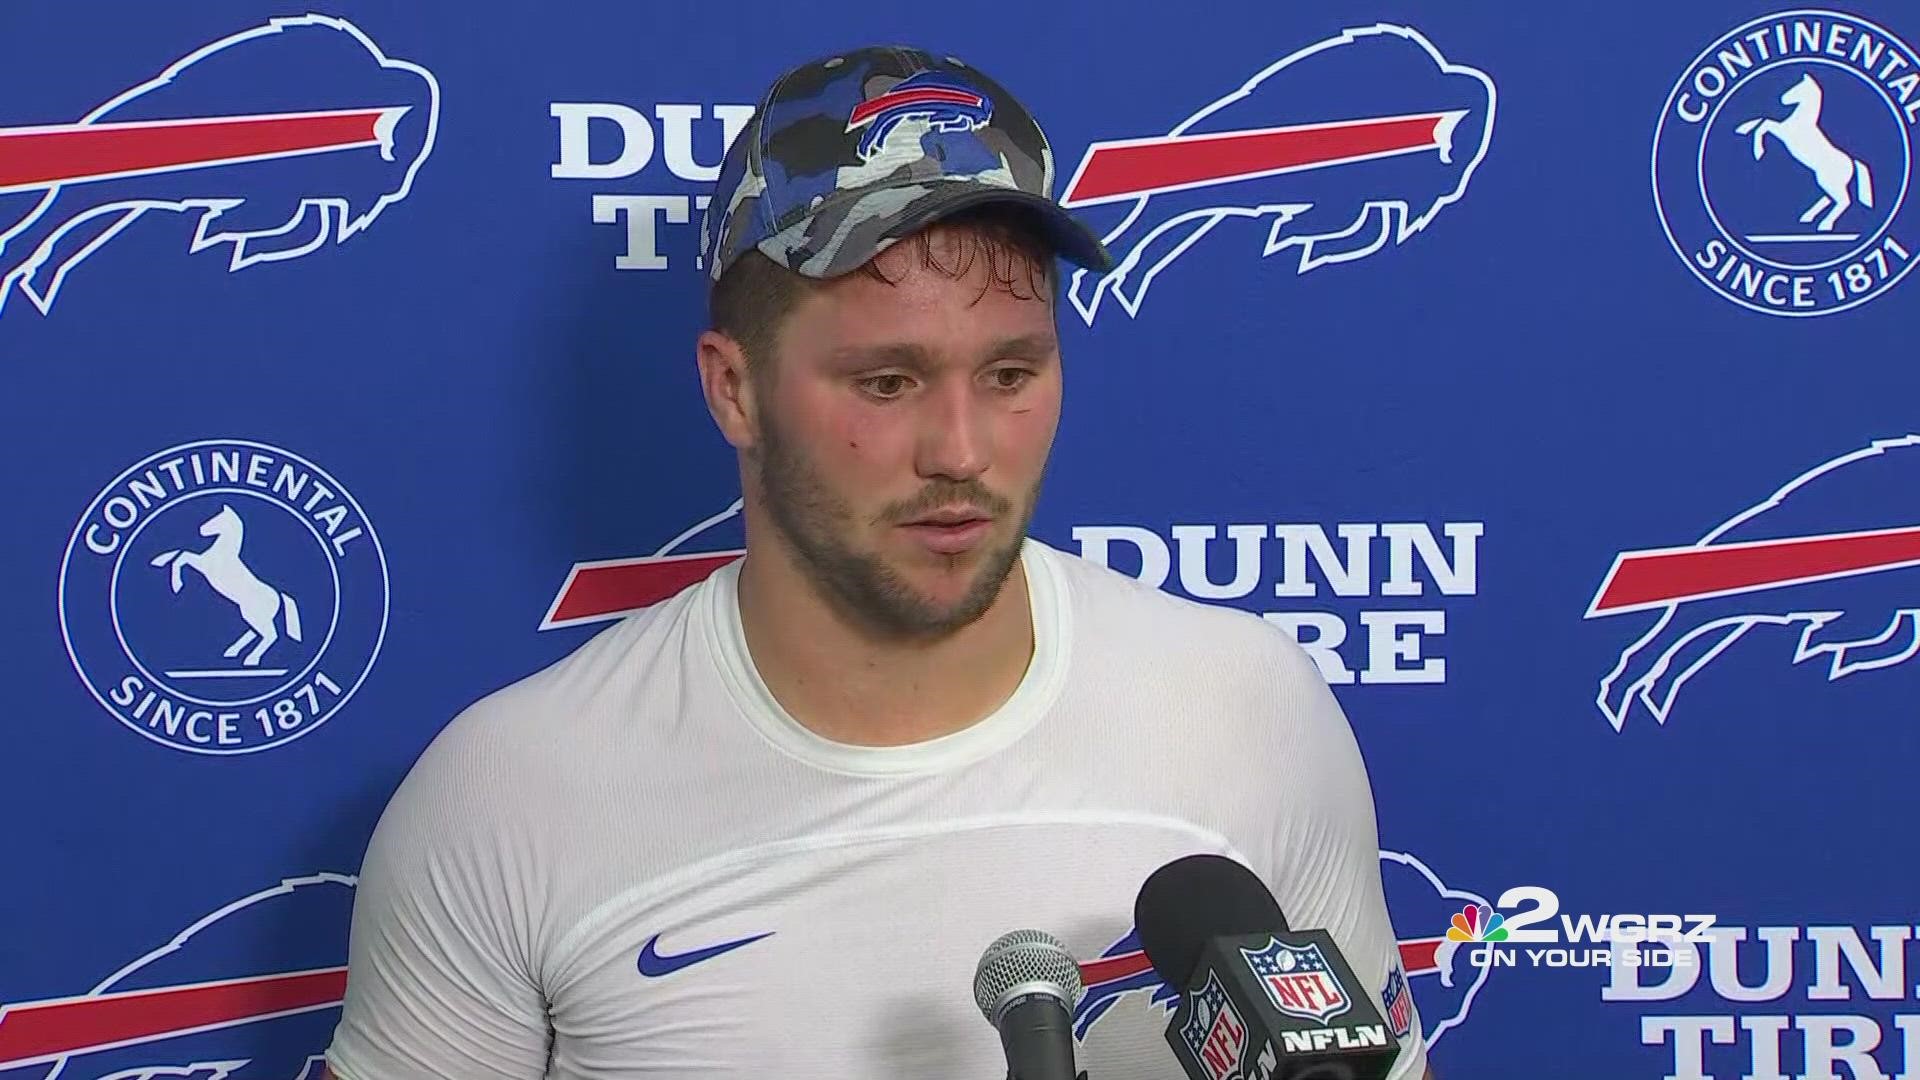 Josh Allen completed 42 of 63 passes for 400 yards and two touchdowns, but the Buffalo Bills lost 21-19 to the Miami Dolphins in South Florida.